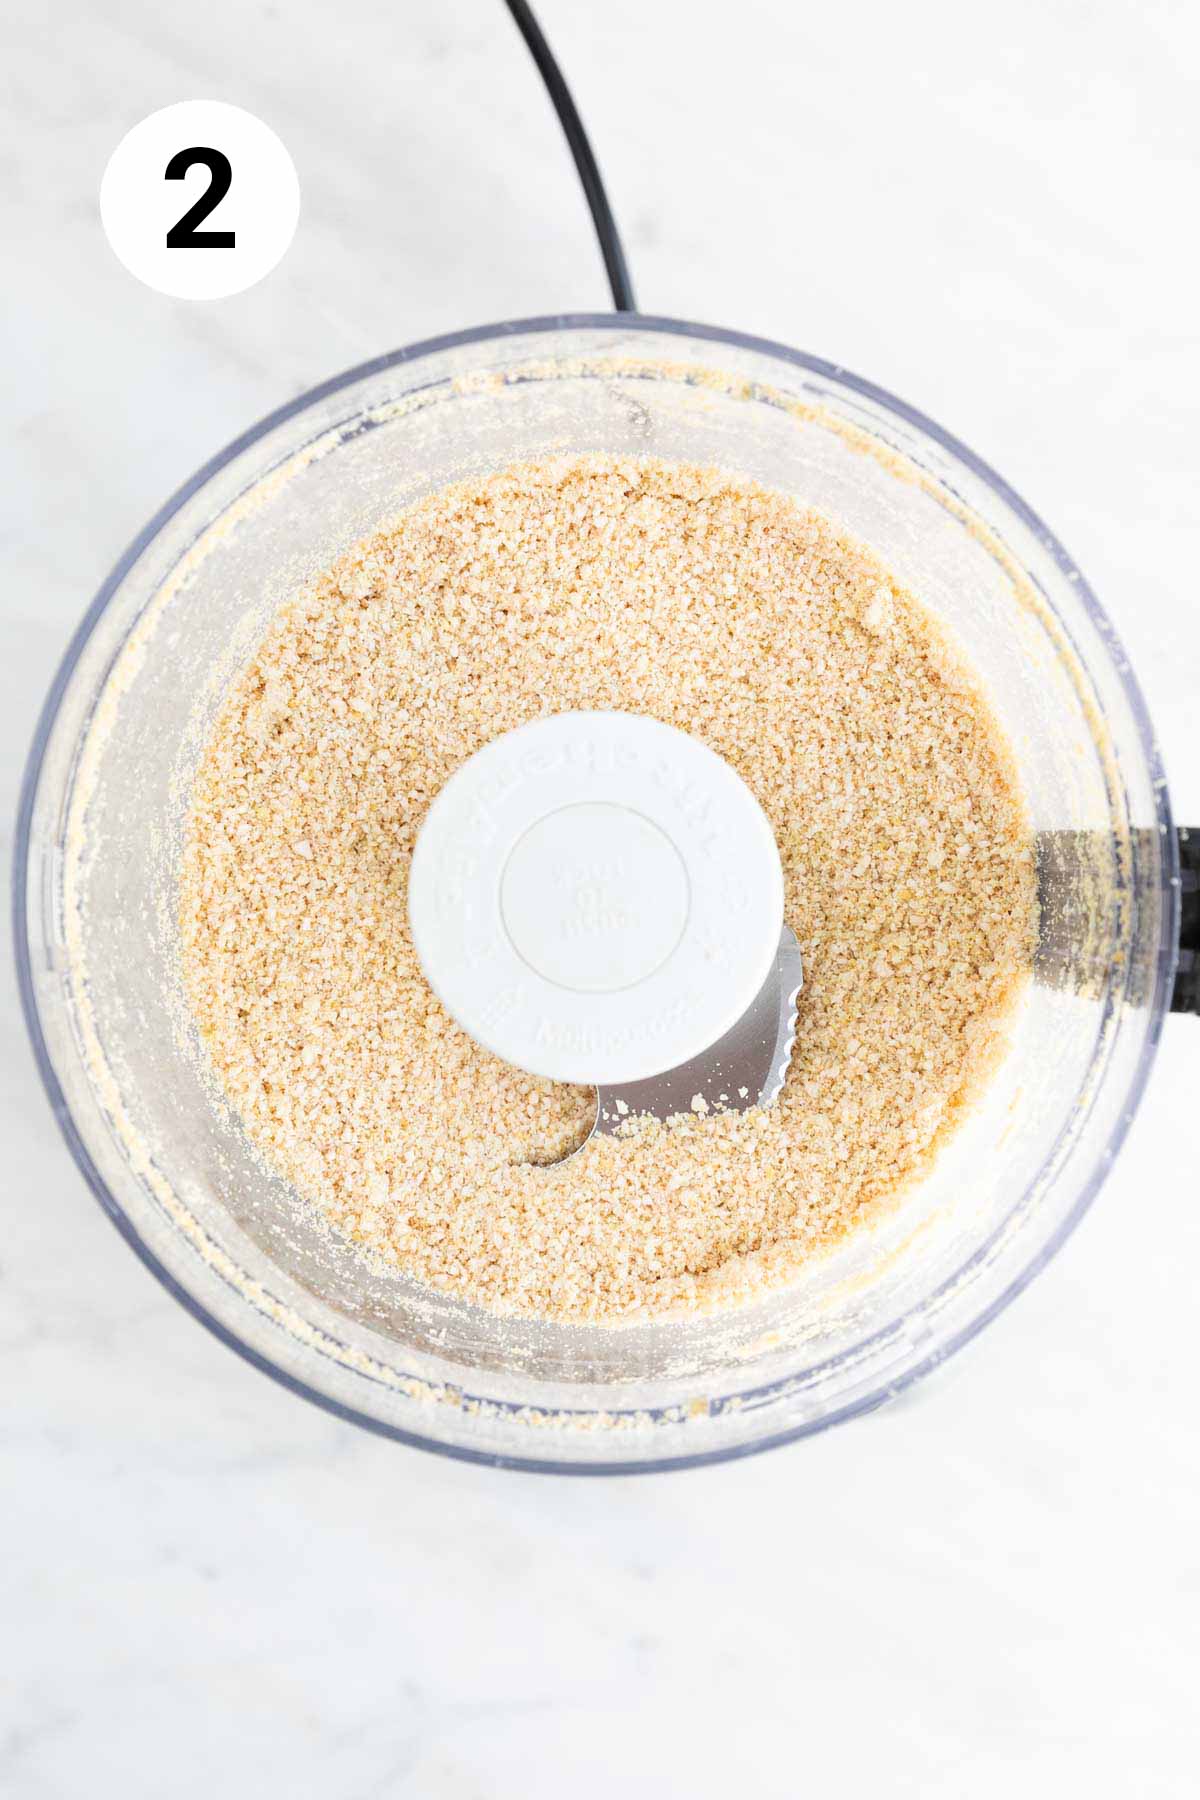 Food processor with finished vegan Parmesan cheese.